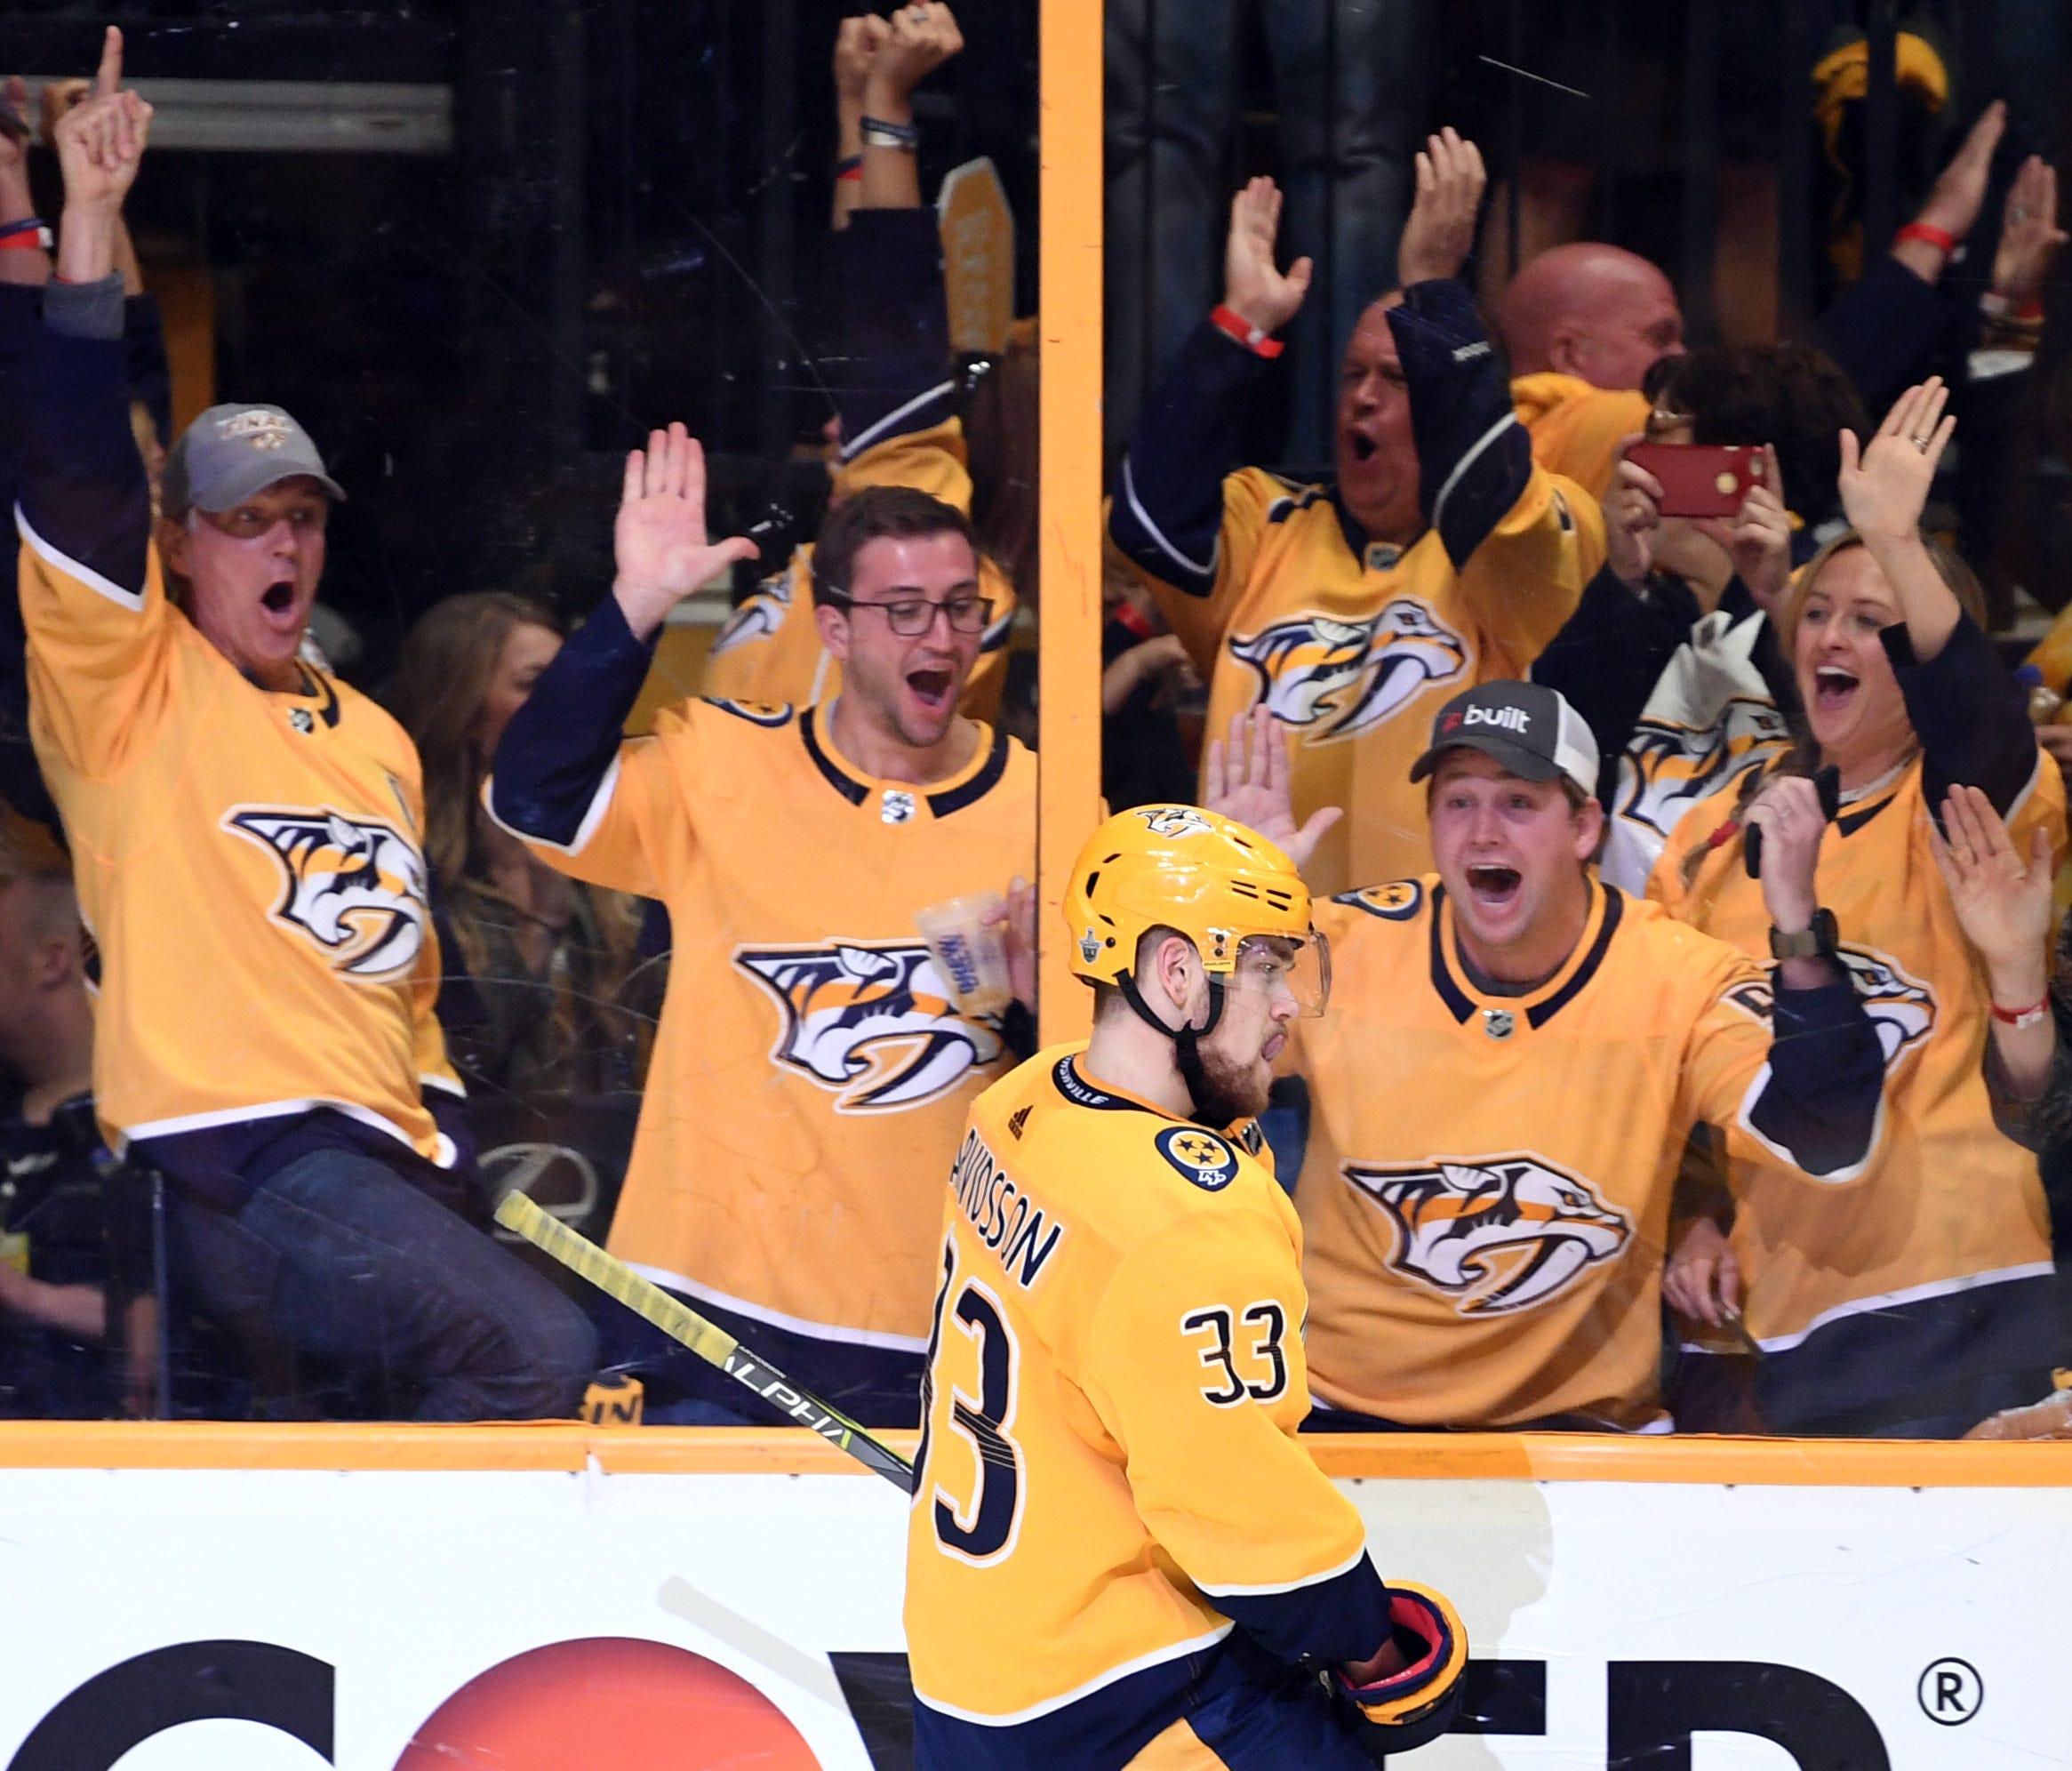 Nashville Predators fans celebrate after a goal by left wing Viktor Arvidsson during the second period Sunday night.